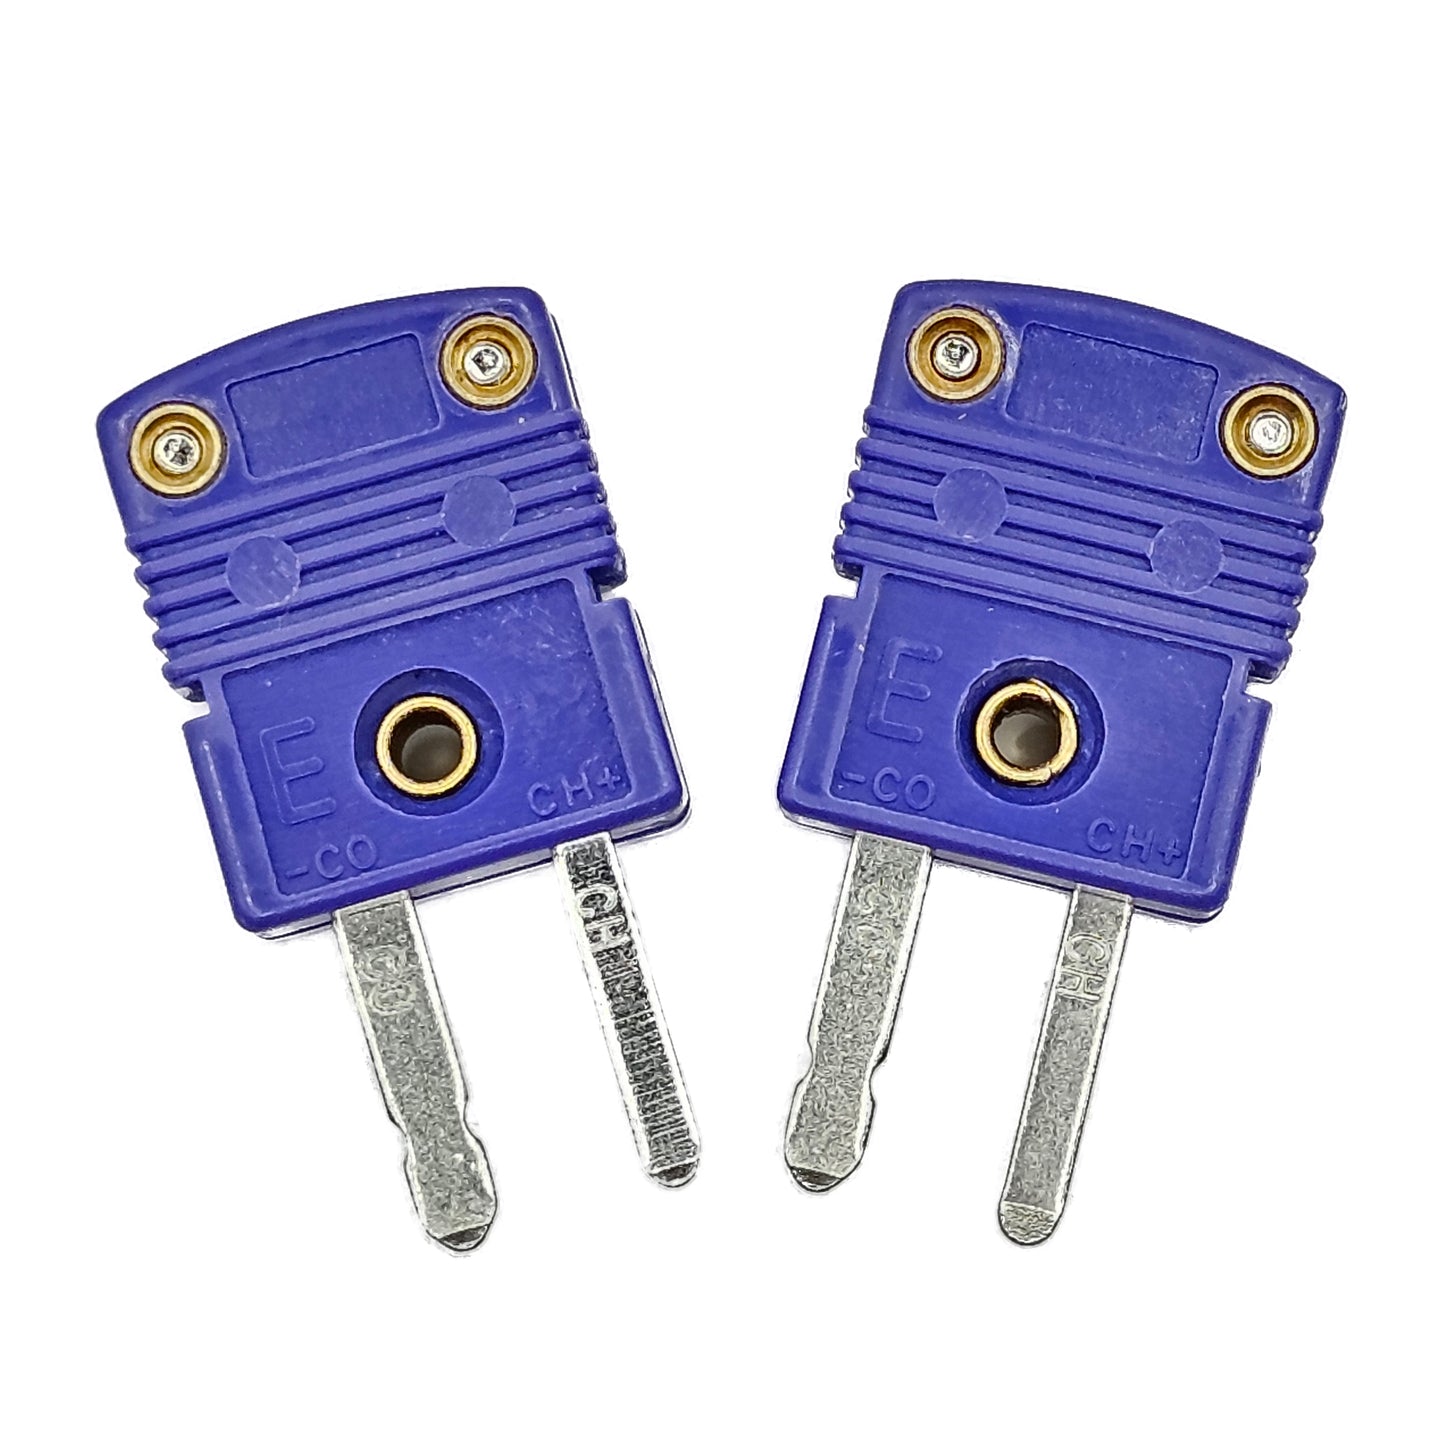 Type E Miniature Thermocouple Connectors, Omega Style - Male, 2-Pack